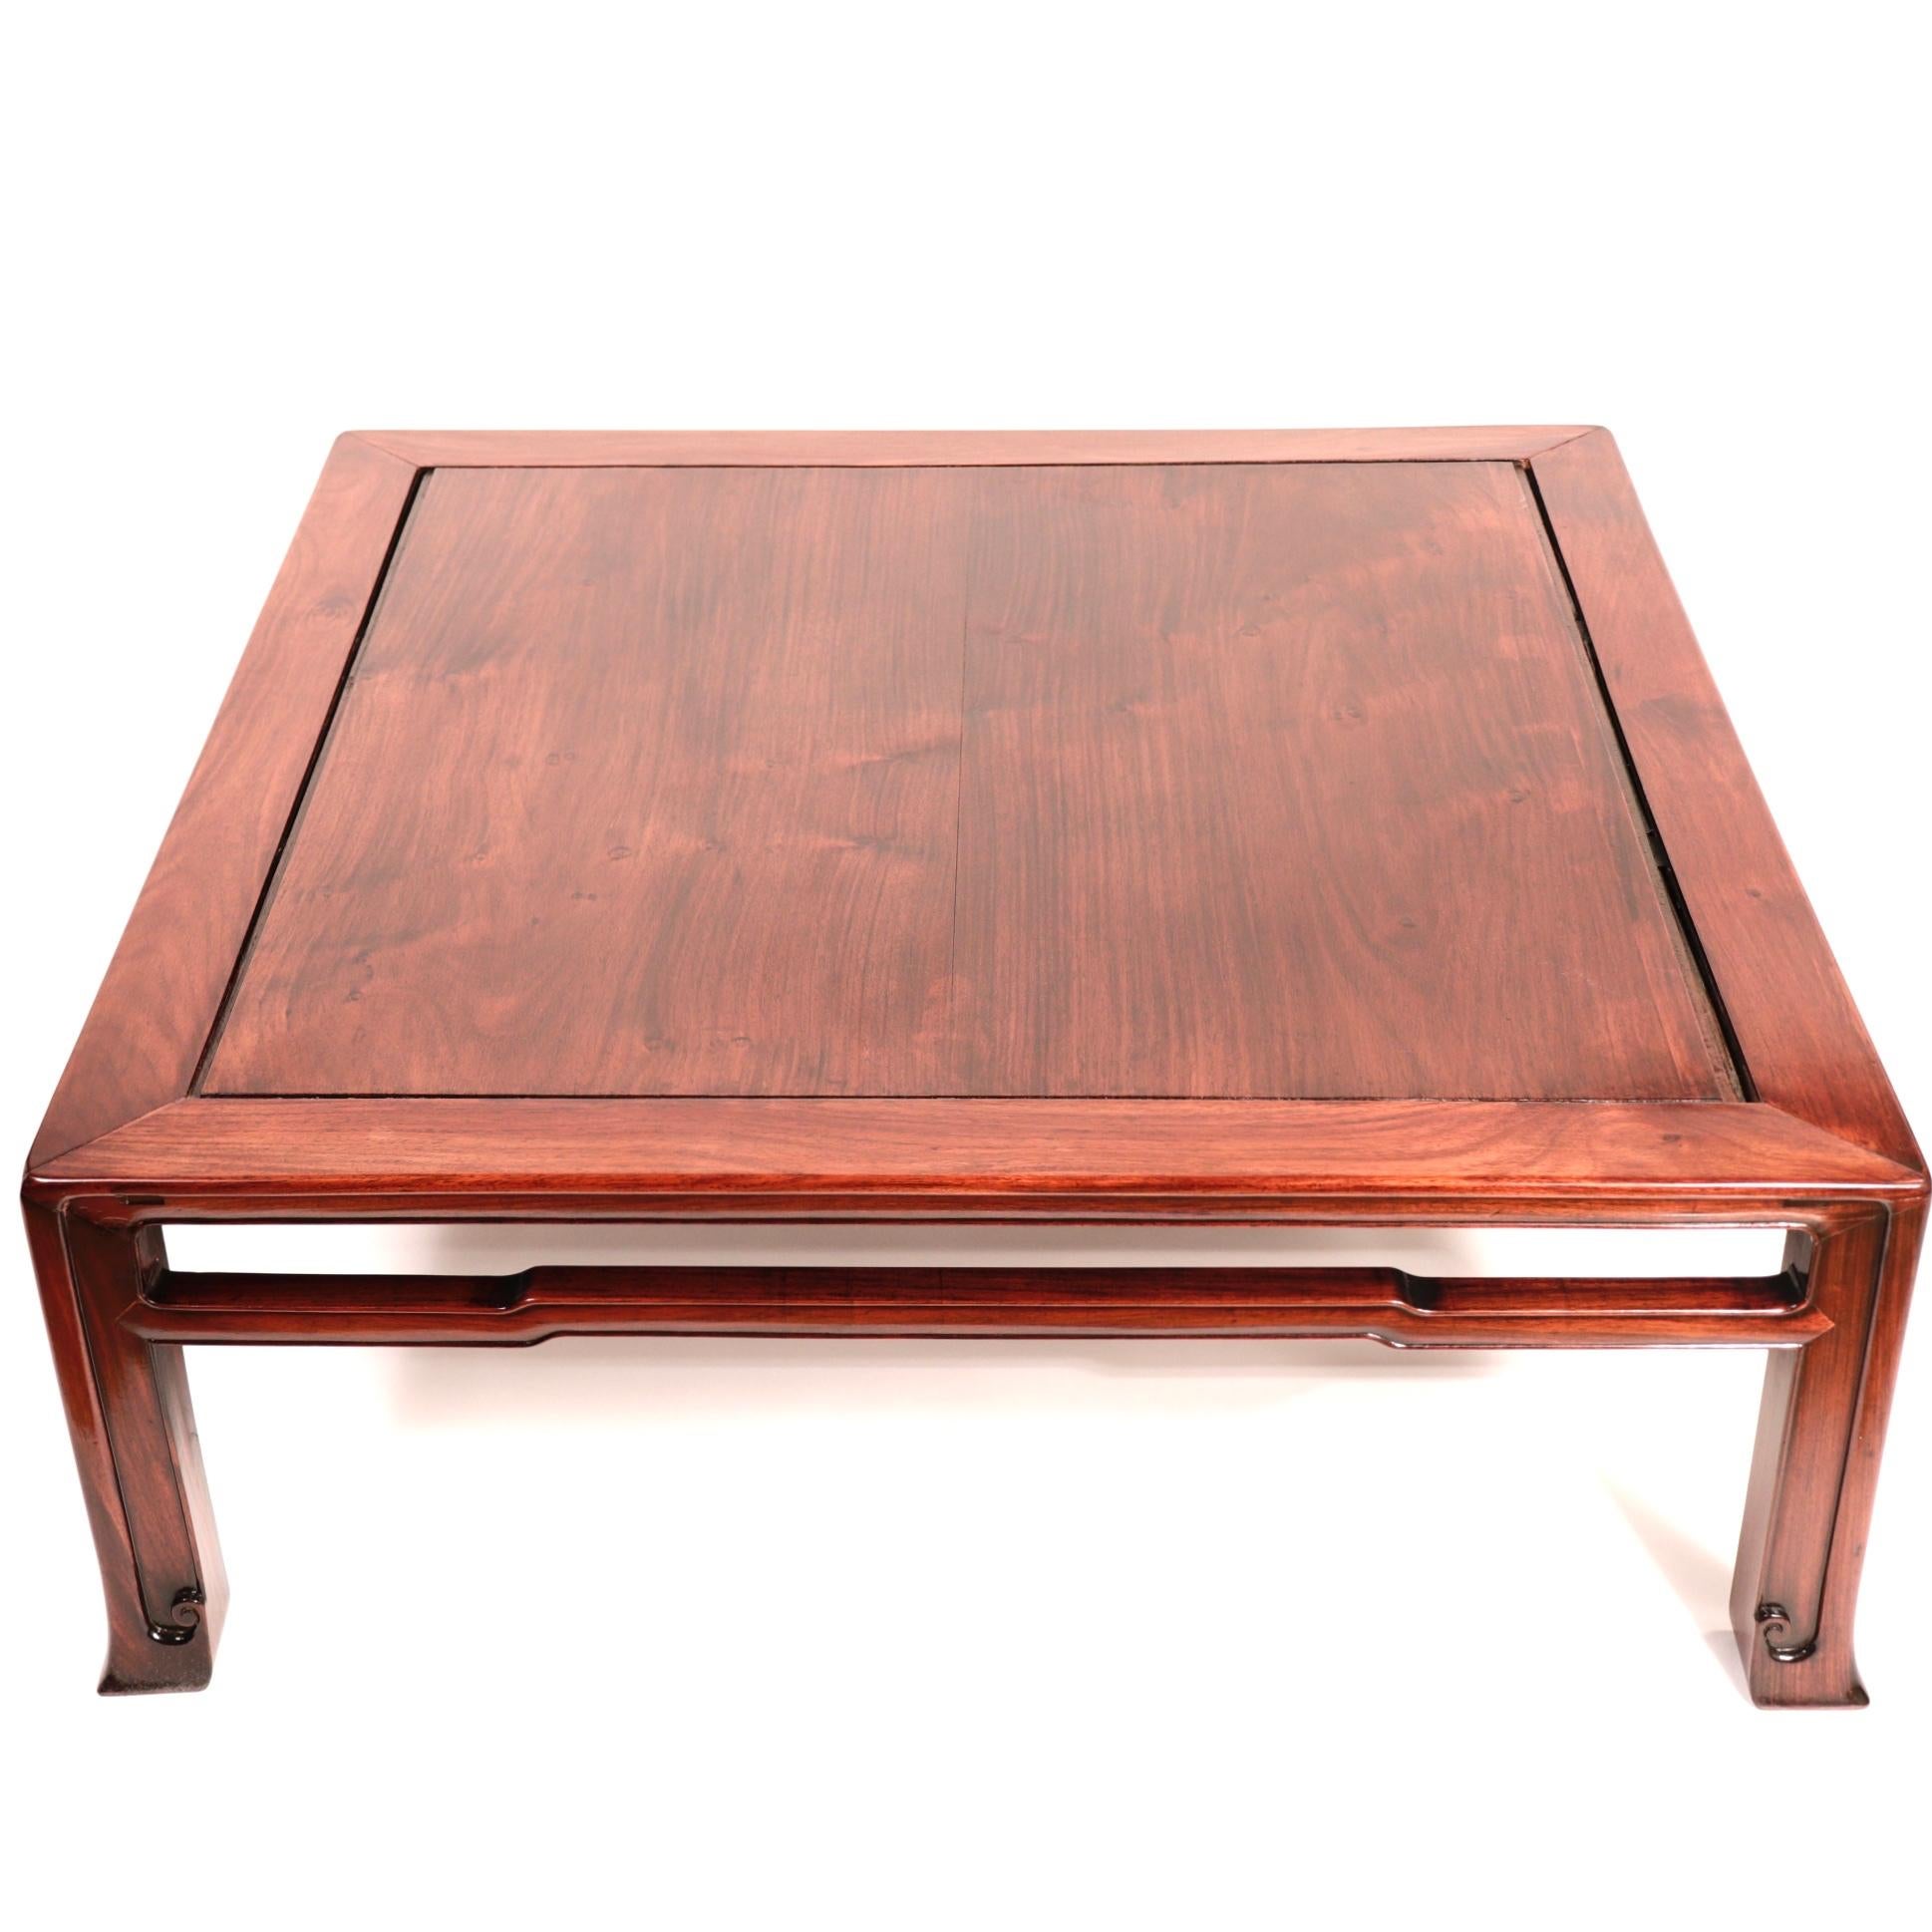 Hand-Crafted Japanese Rosewood Square Tea Table For Sale